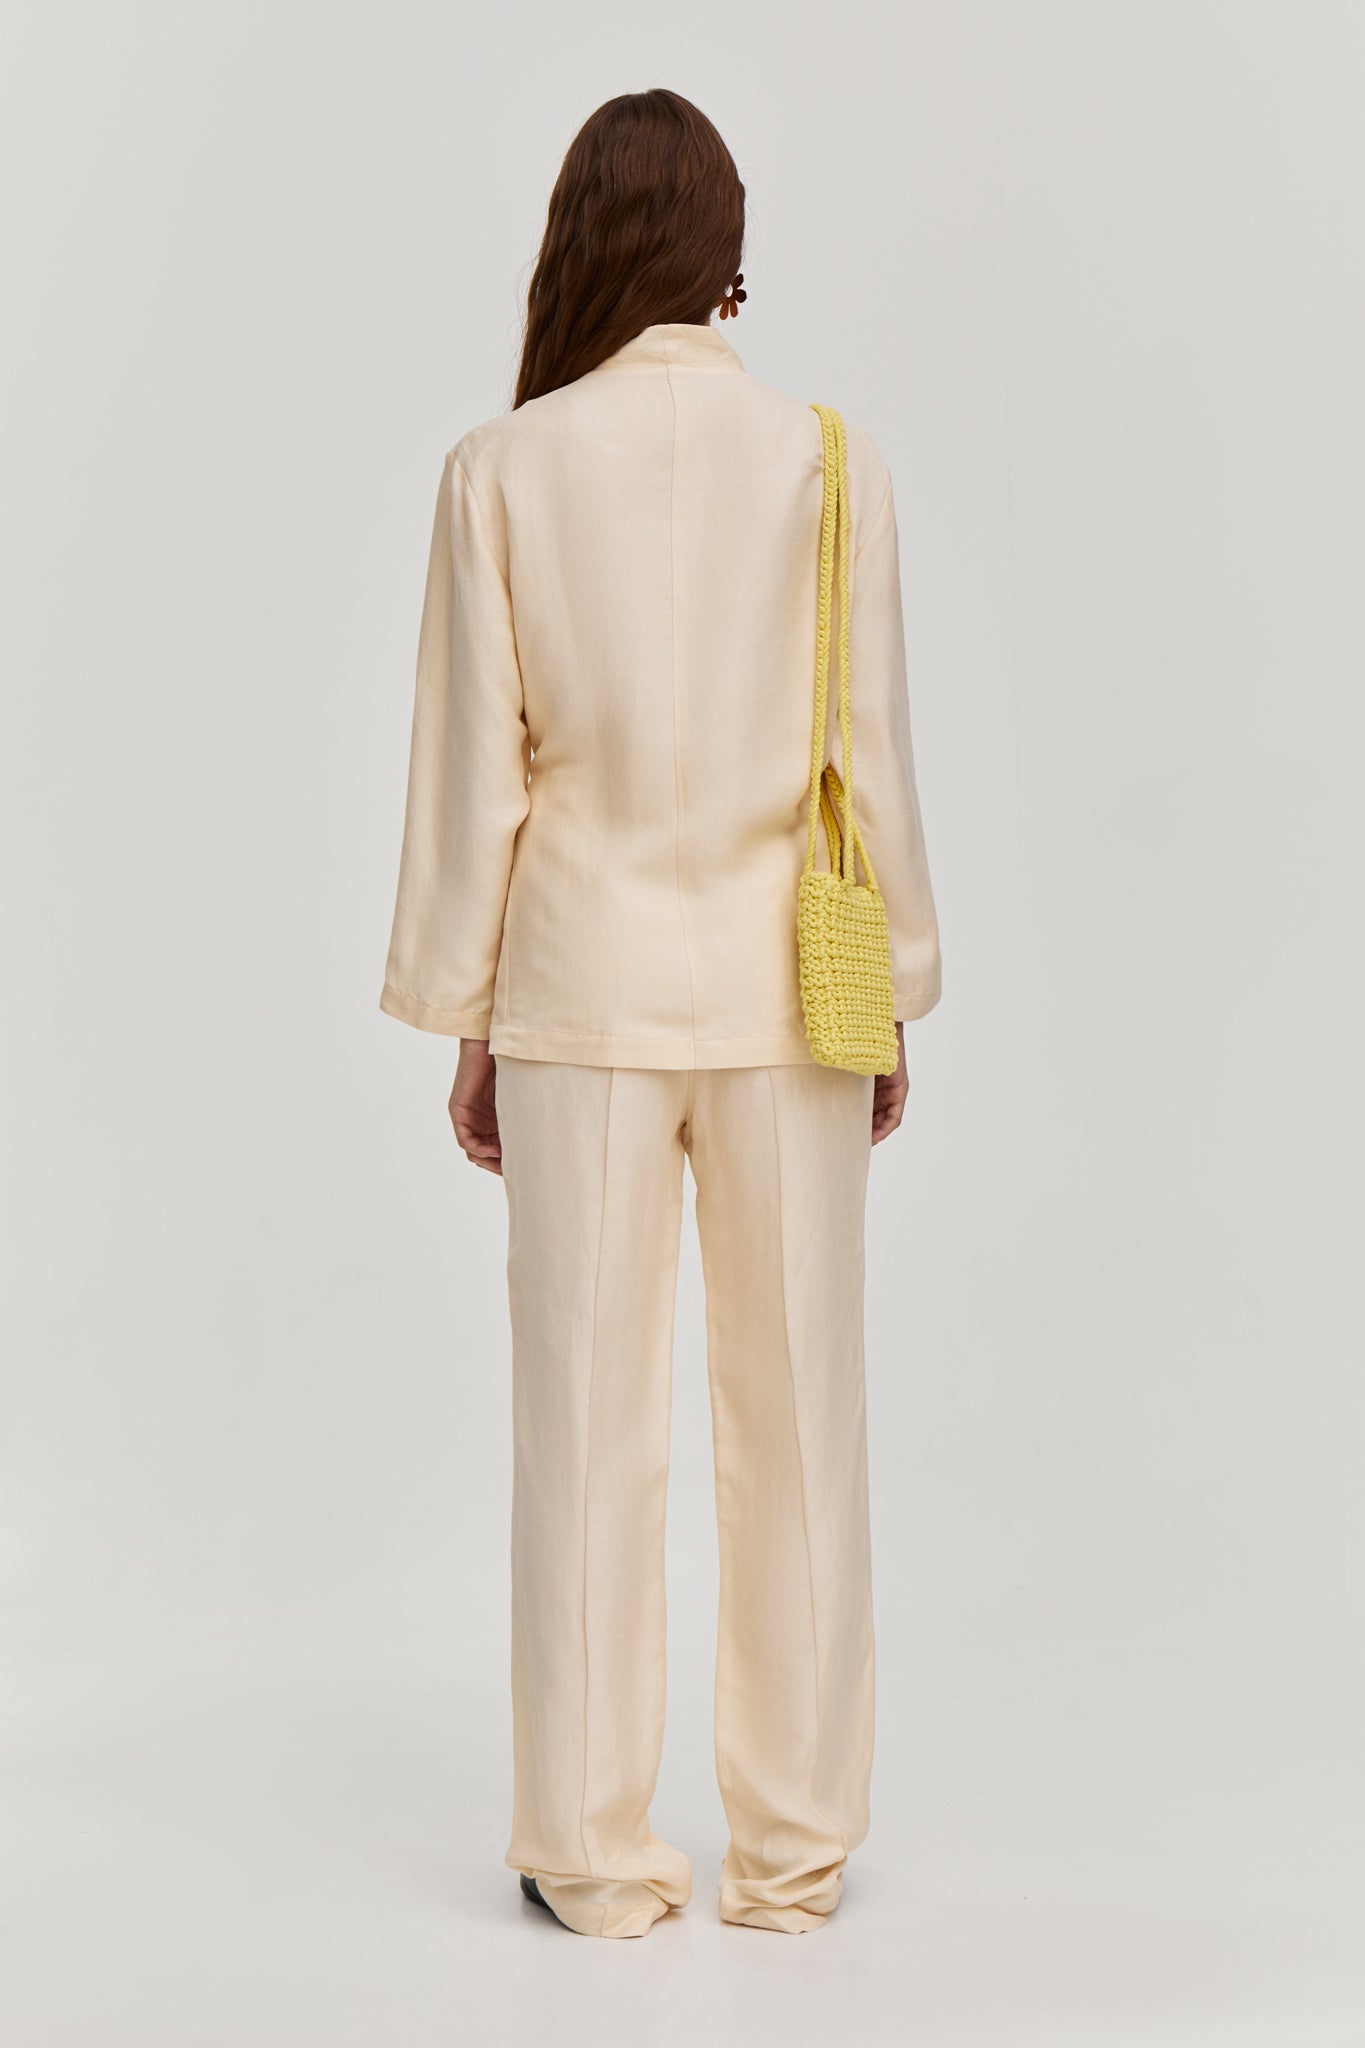 Linen blend suit with trousers and shirt-jacket. Match this shirt with linen pants in the same fabric and crochet bag from FORMA